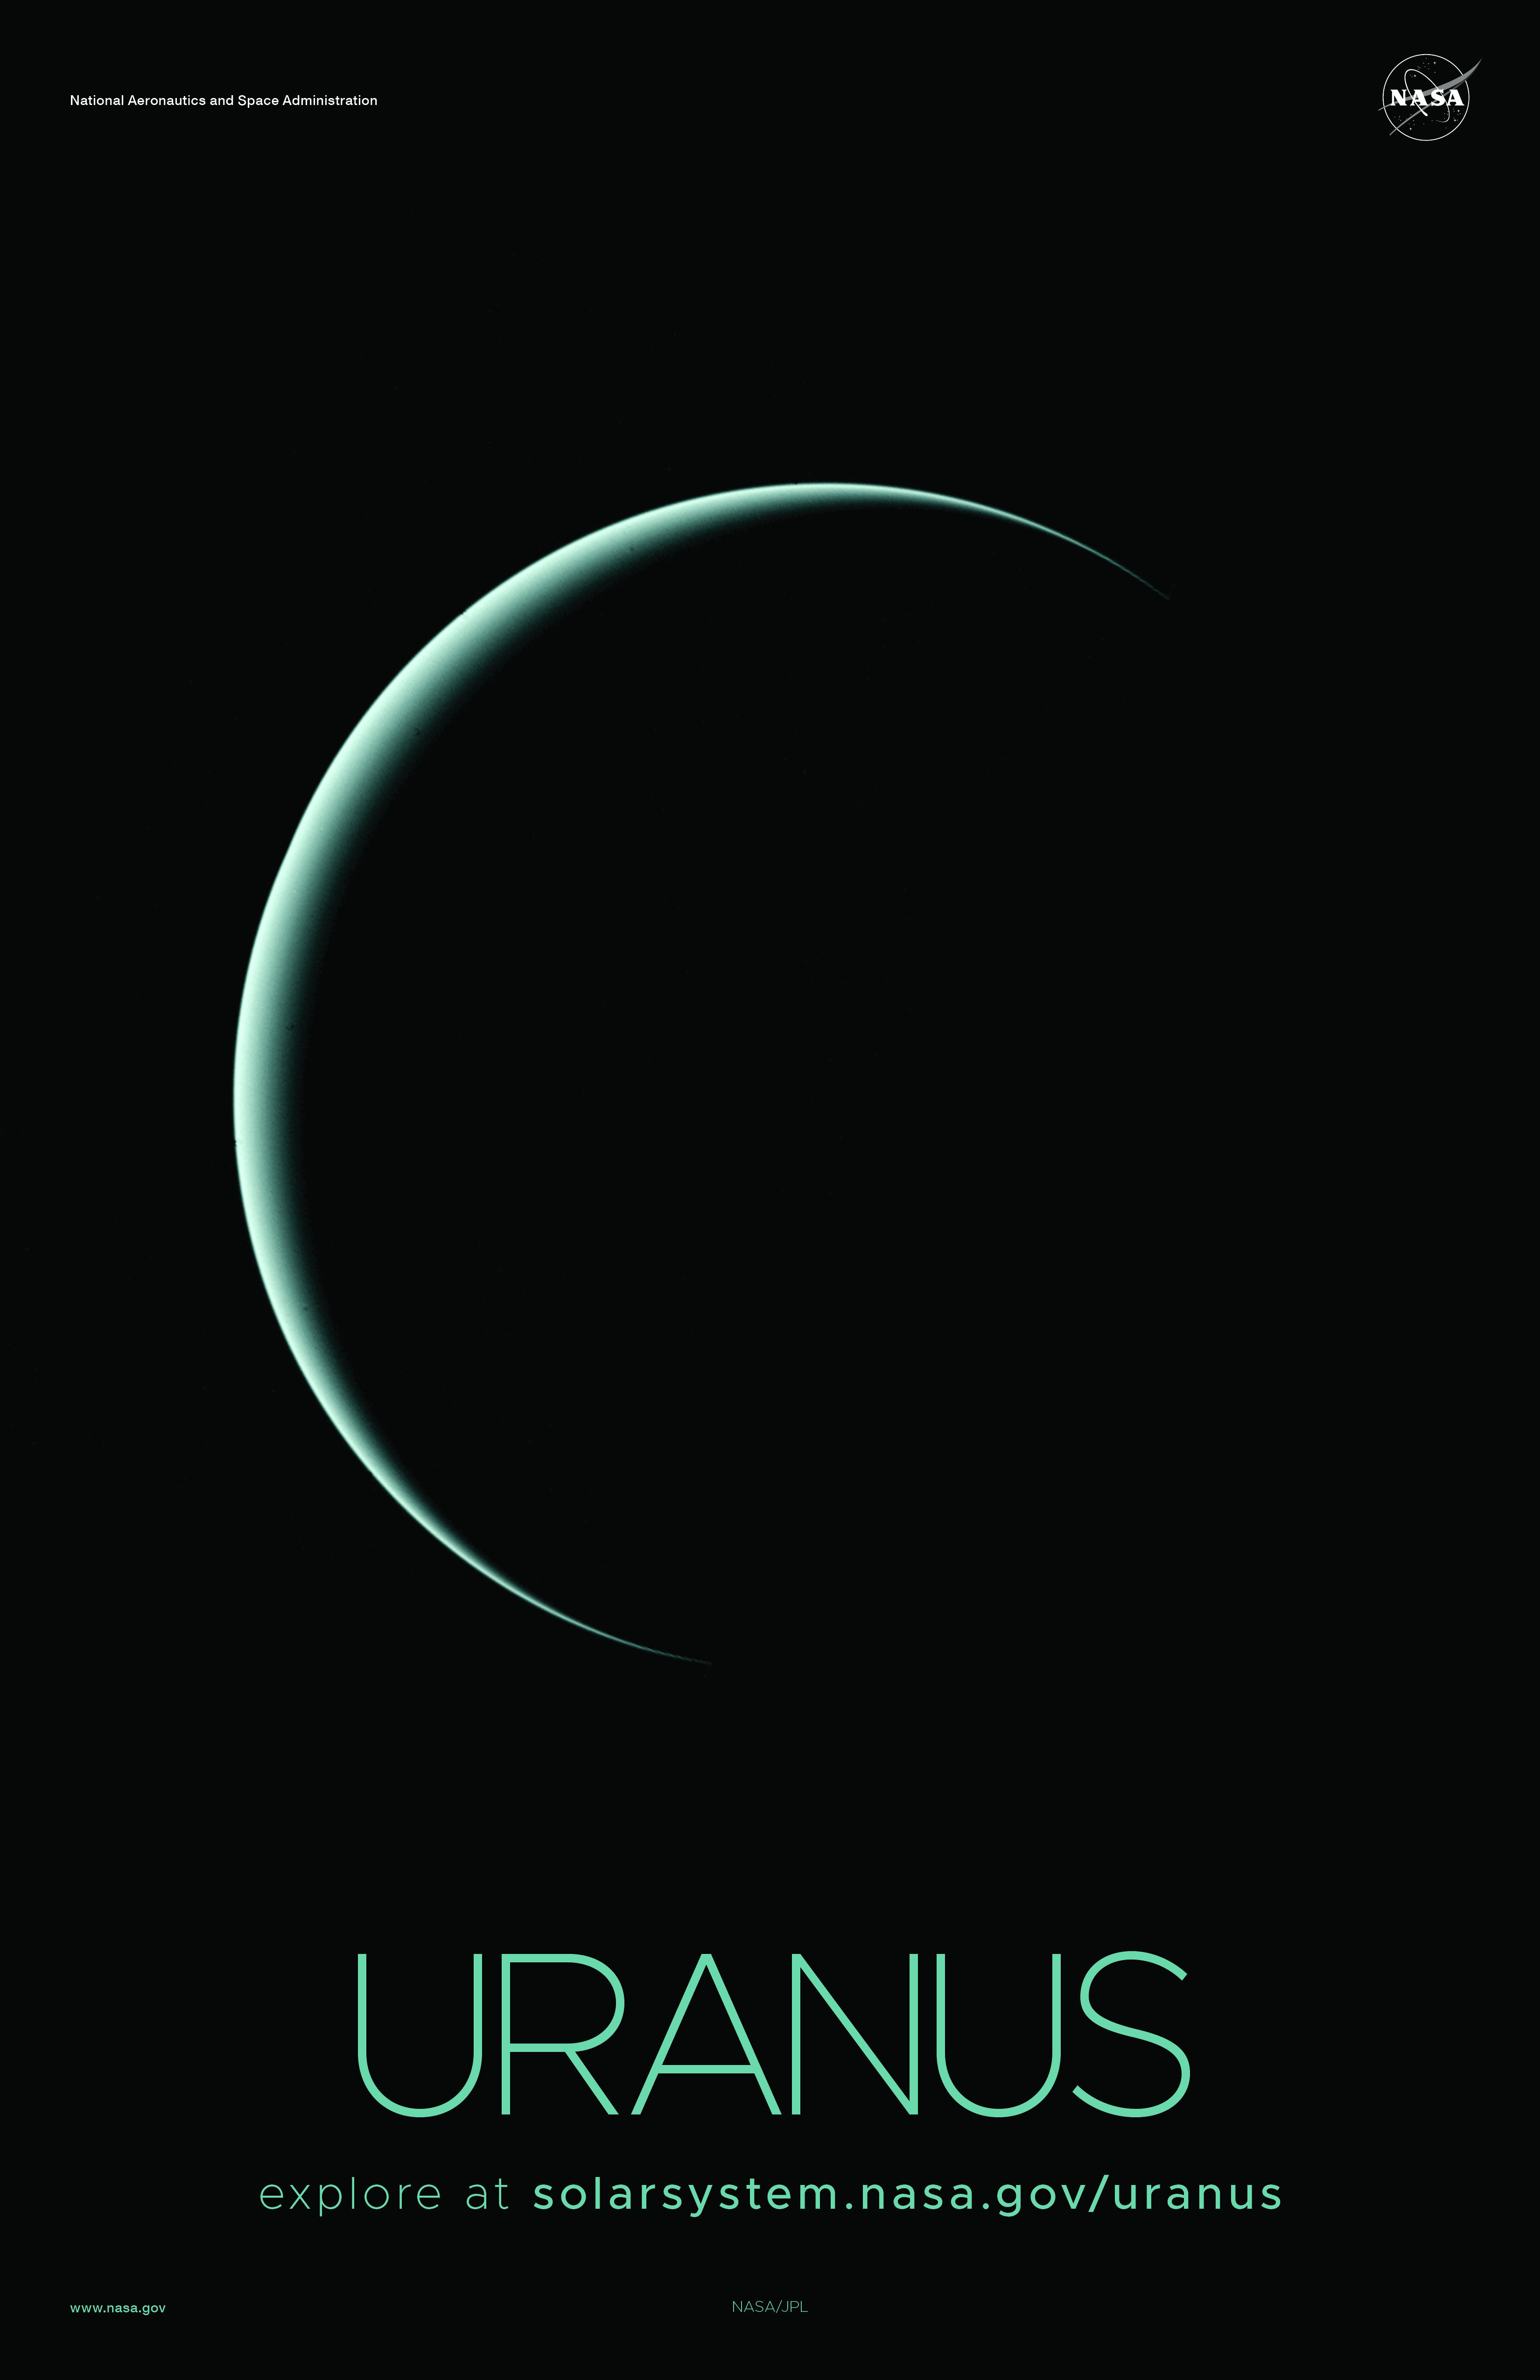 A sliver of the planet Uranus is shown with a black backdrop.